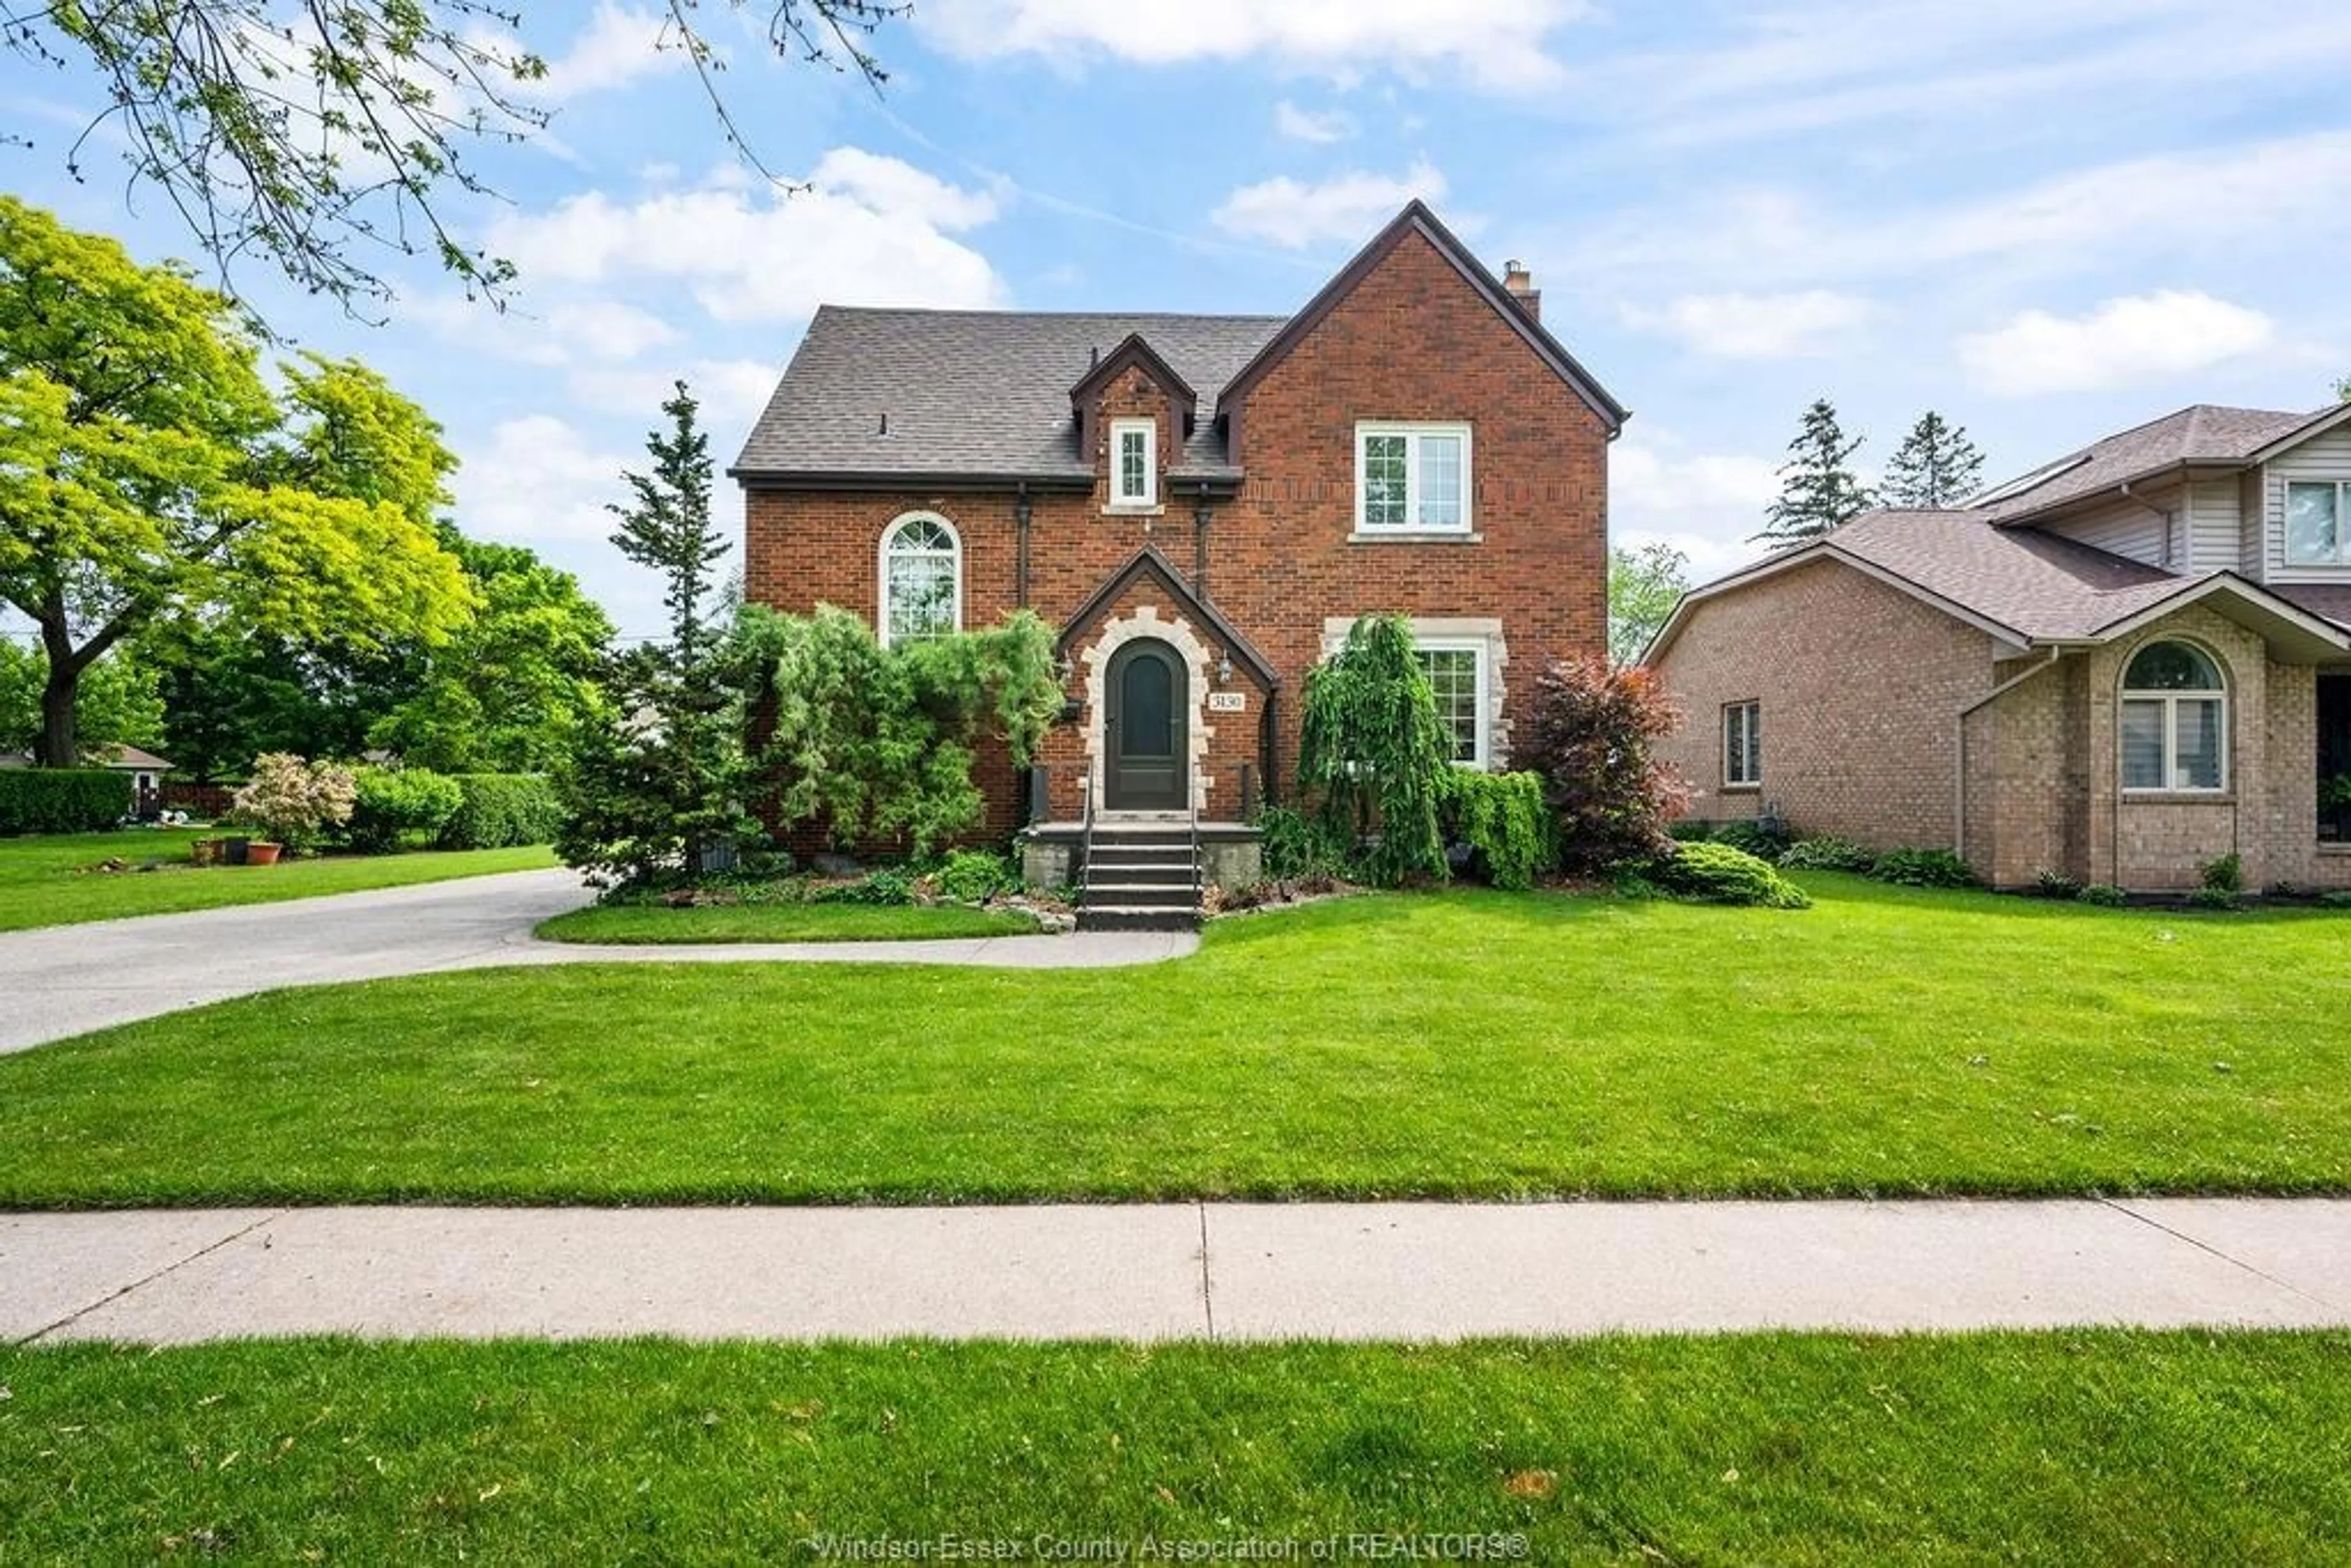 Home with brick exterior material for 3130 CALIFORNIA Ave, Windsor Ontario N9E 3K6